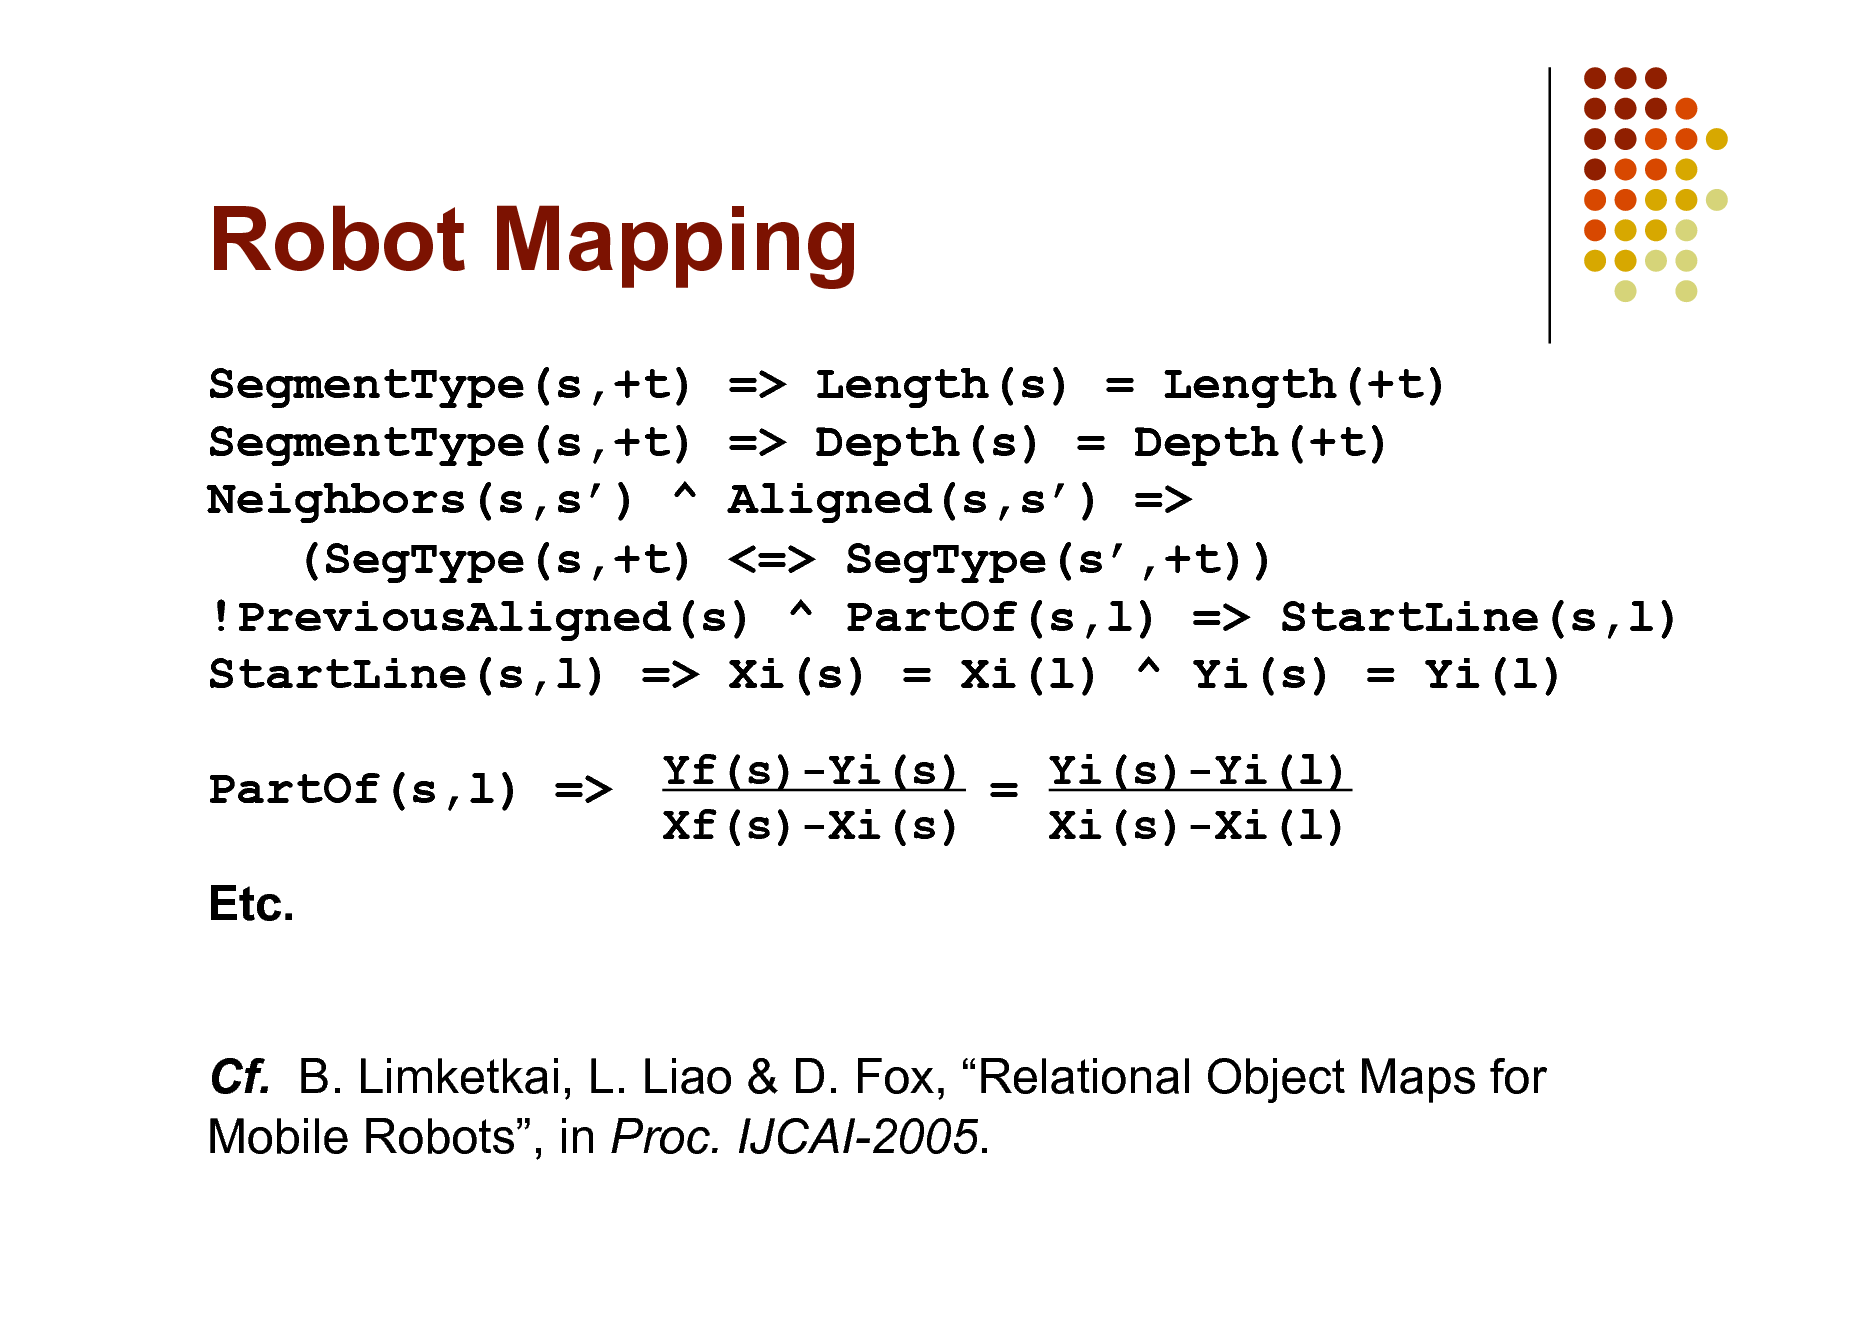 Slide: Robot Mapping
SegmentType(s,+t) => Length(s) = Length(+t) SegmentType(s,+t) => Depth(s) = Depth(+t) Neighbors(s,s) ^ Aligned(s,s) => (SegType(s,+t) <=> SegType(s,+t)) !PreviousAligned(s) ^ PartOf(s,l) => StartLine(s,l) StartLine(s,l) => Xi(s) = Xi(l) ^ Yi(s) = Yi(l) PartOf(s,l) => Etc. Cf. B. Limketkai, L. Liao & D. Fox, Relational Object Maps for Mobile Robots, in Proc. IJCAI-2005.
Yf(s)-Yi(s) = Yi(s)-Yi(l) Xf(s)-Xi(s) Xi(s)-Xi(l)

